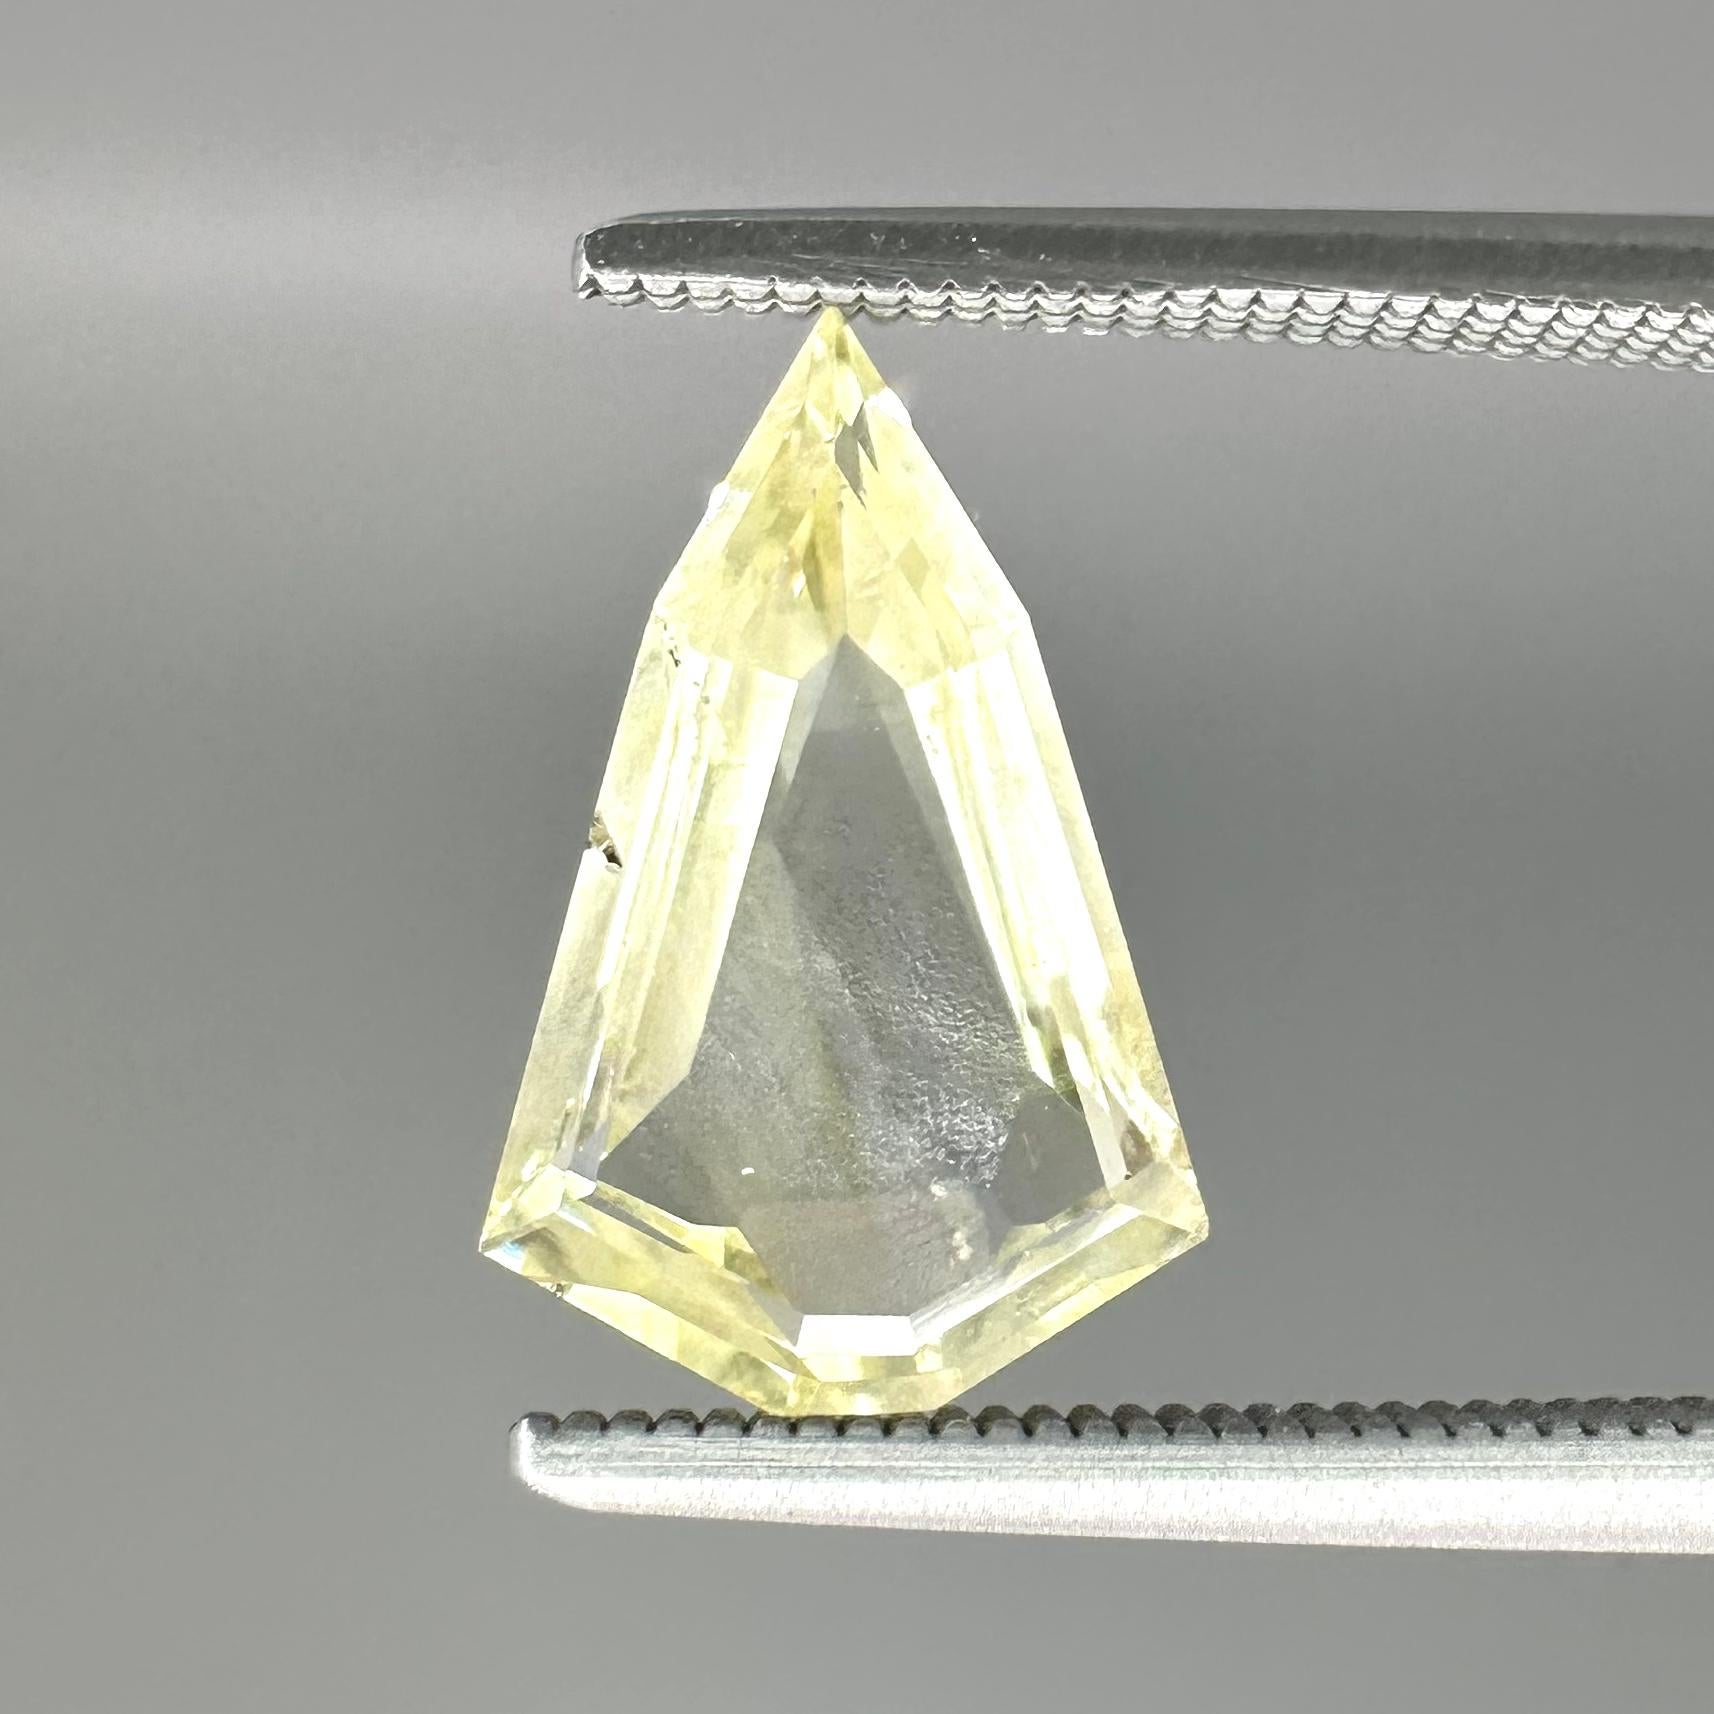 Aegis, named for the shield carried by Zeus and Athena in Greek mythology, is a one-of-a-kind shield-shaped portrait cut yellow sapphire from Sri Lanka. Let its large shape and looking glass center protect you from the boring everyday, and spark